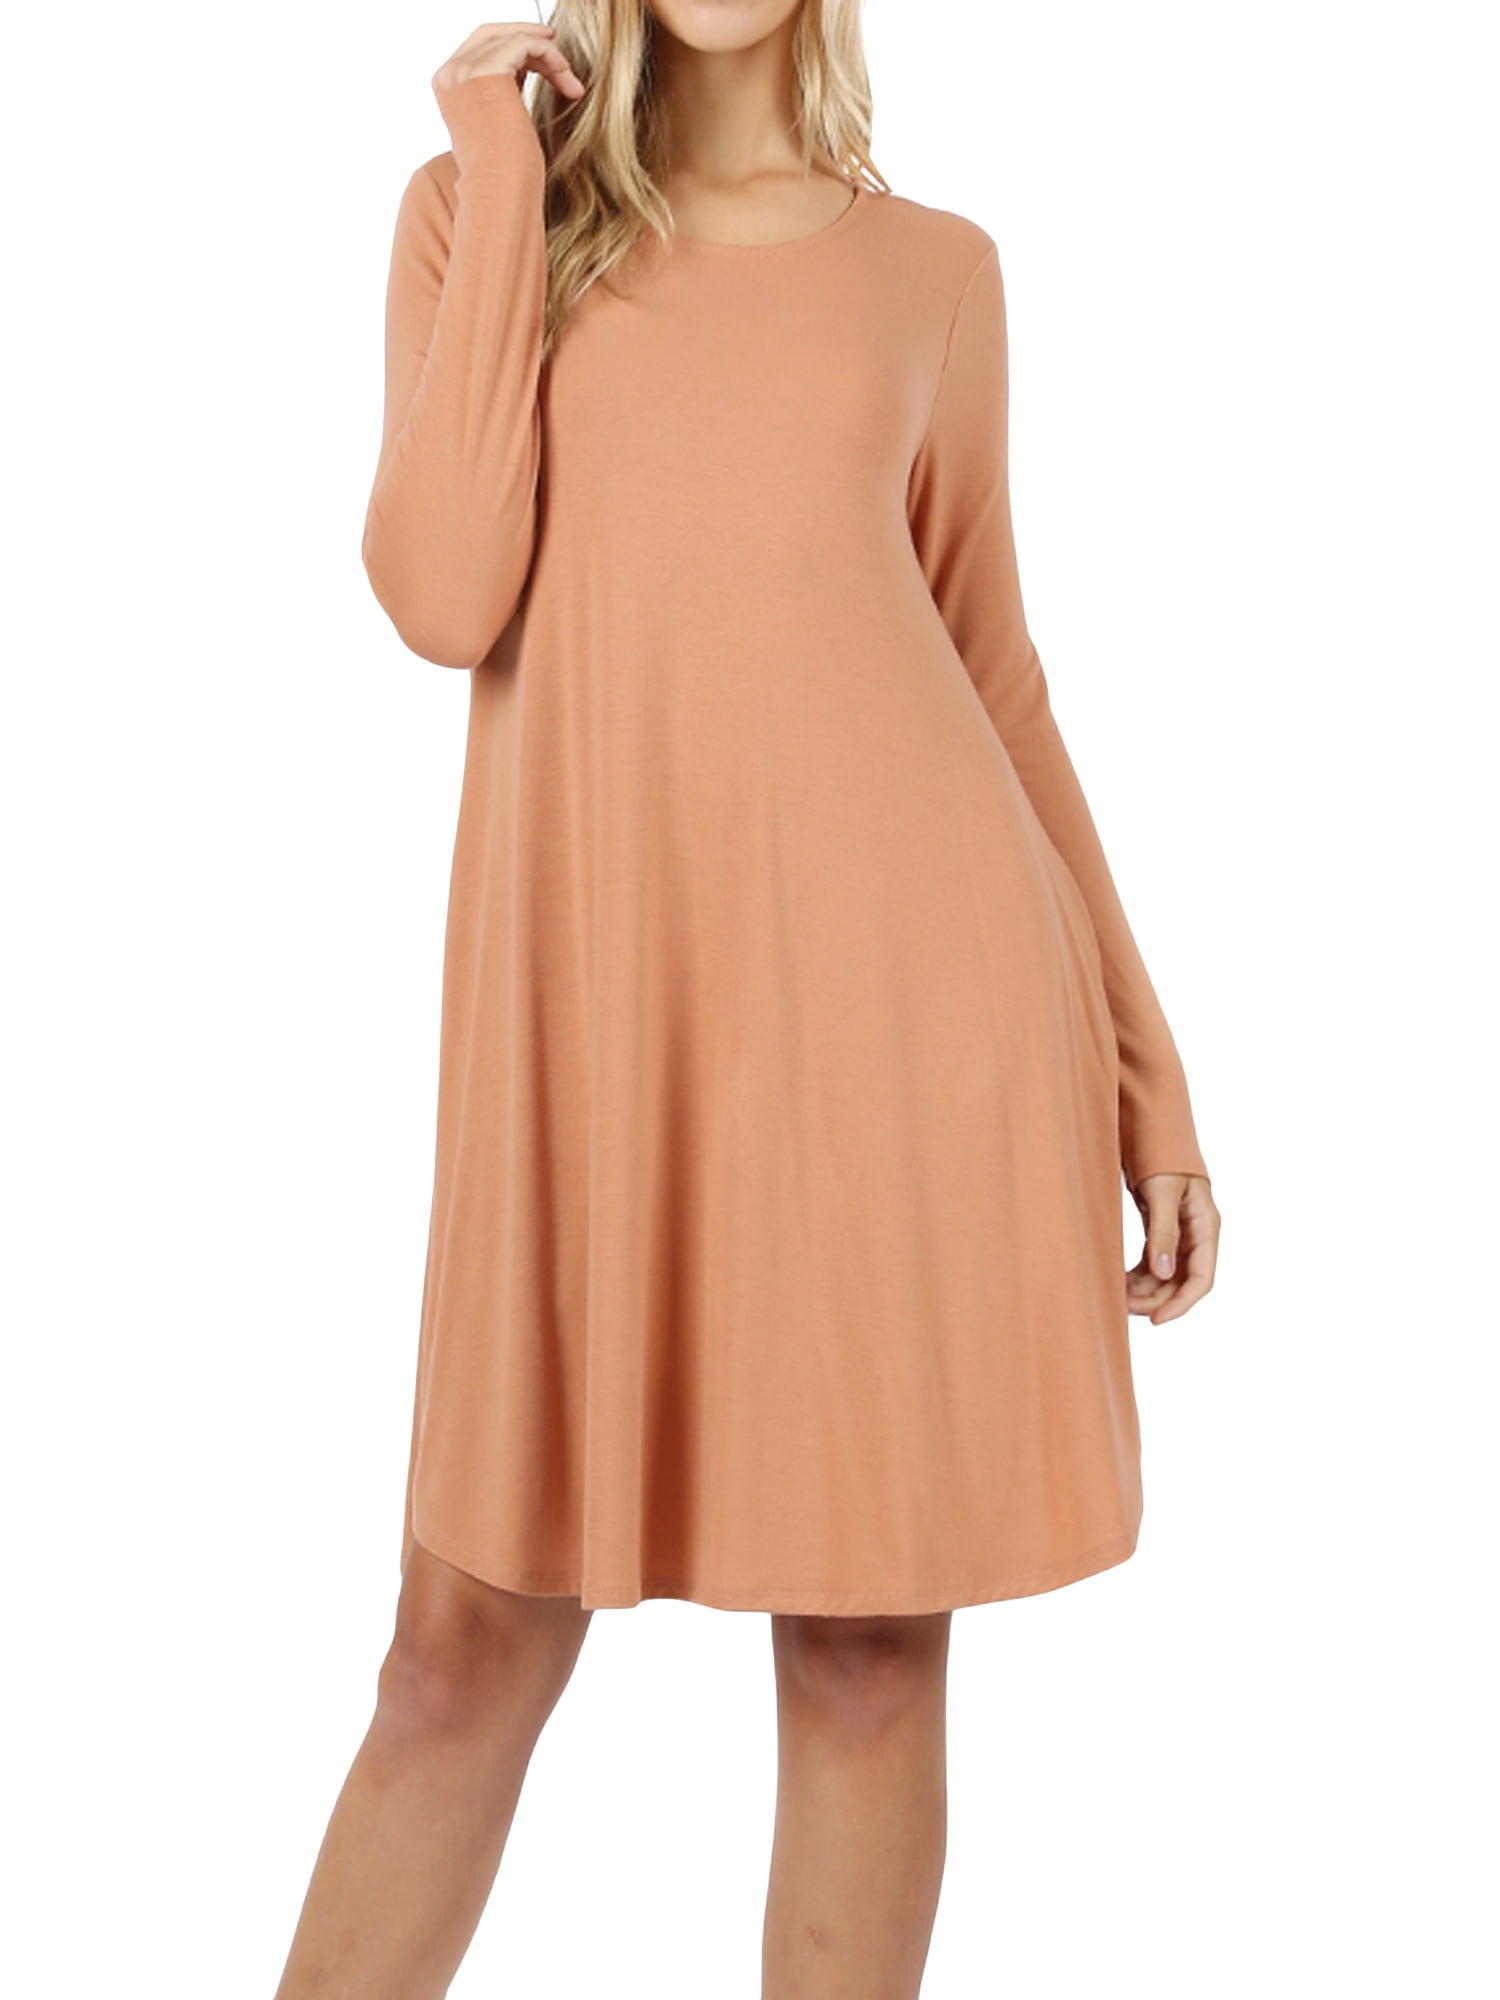 TheLovely - Women Long Sleeve Round Hem A-Line Pleated Swing Dress with ...